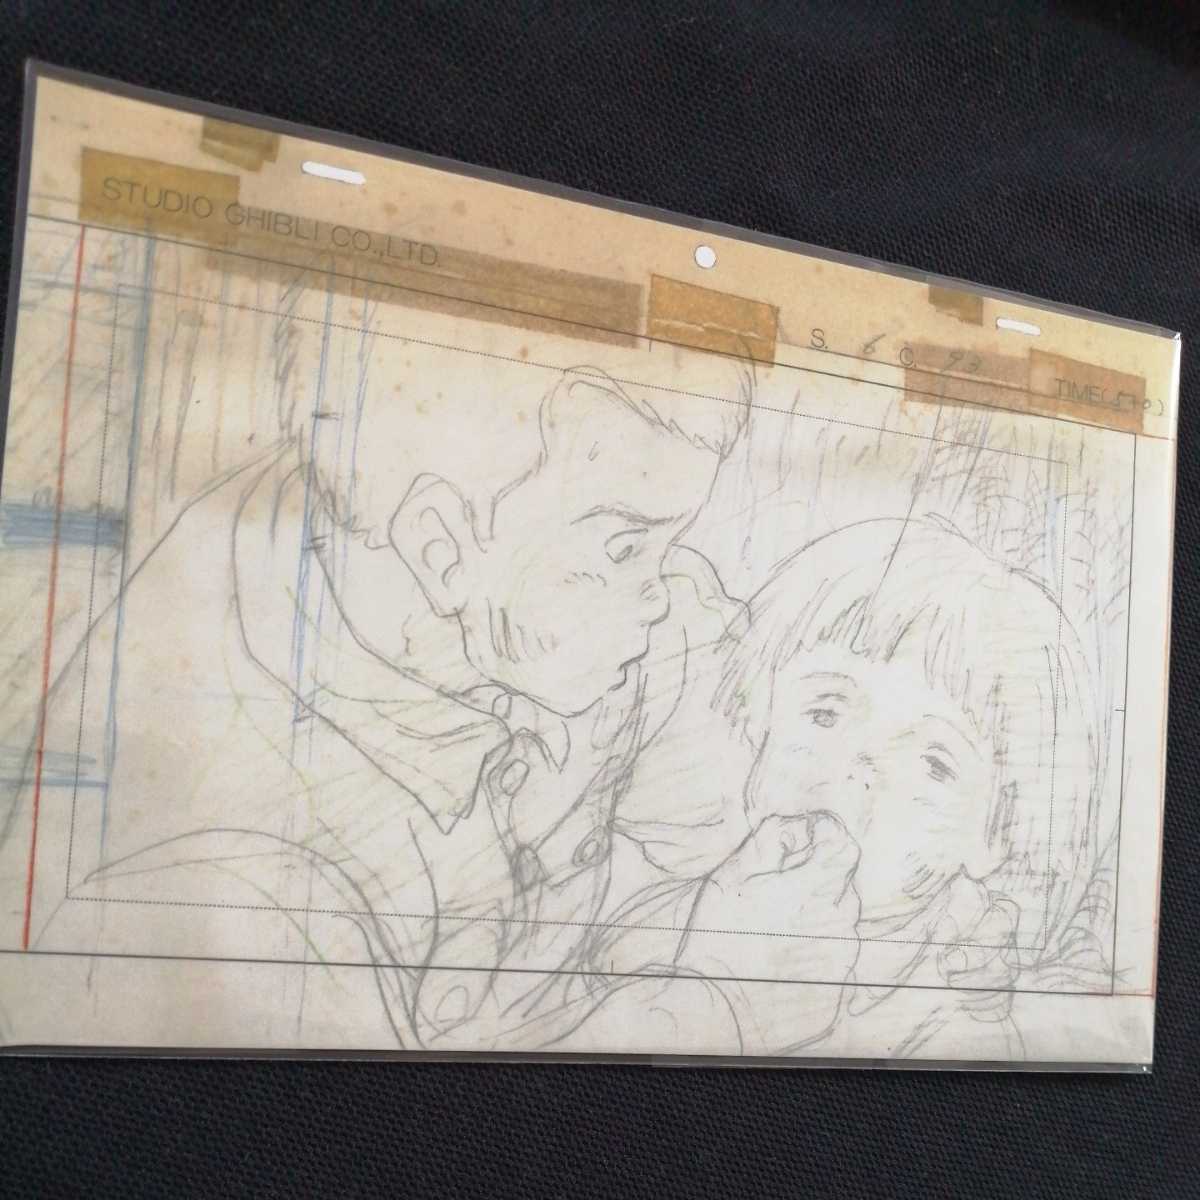  Studio Ghibli fire shide .. . layout cut . inspection ) Ghibli postcard poster original picture cell picture layout exhibition Miyazaki .e